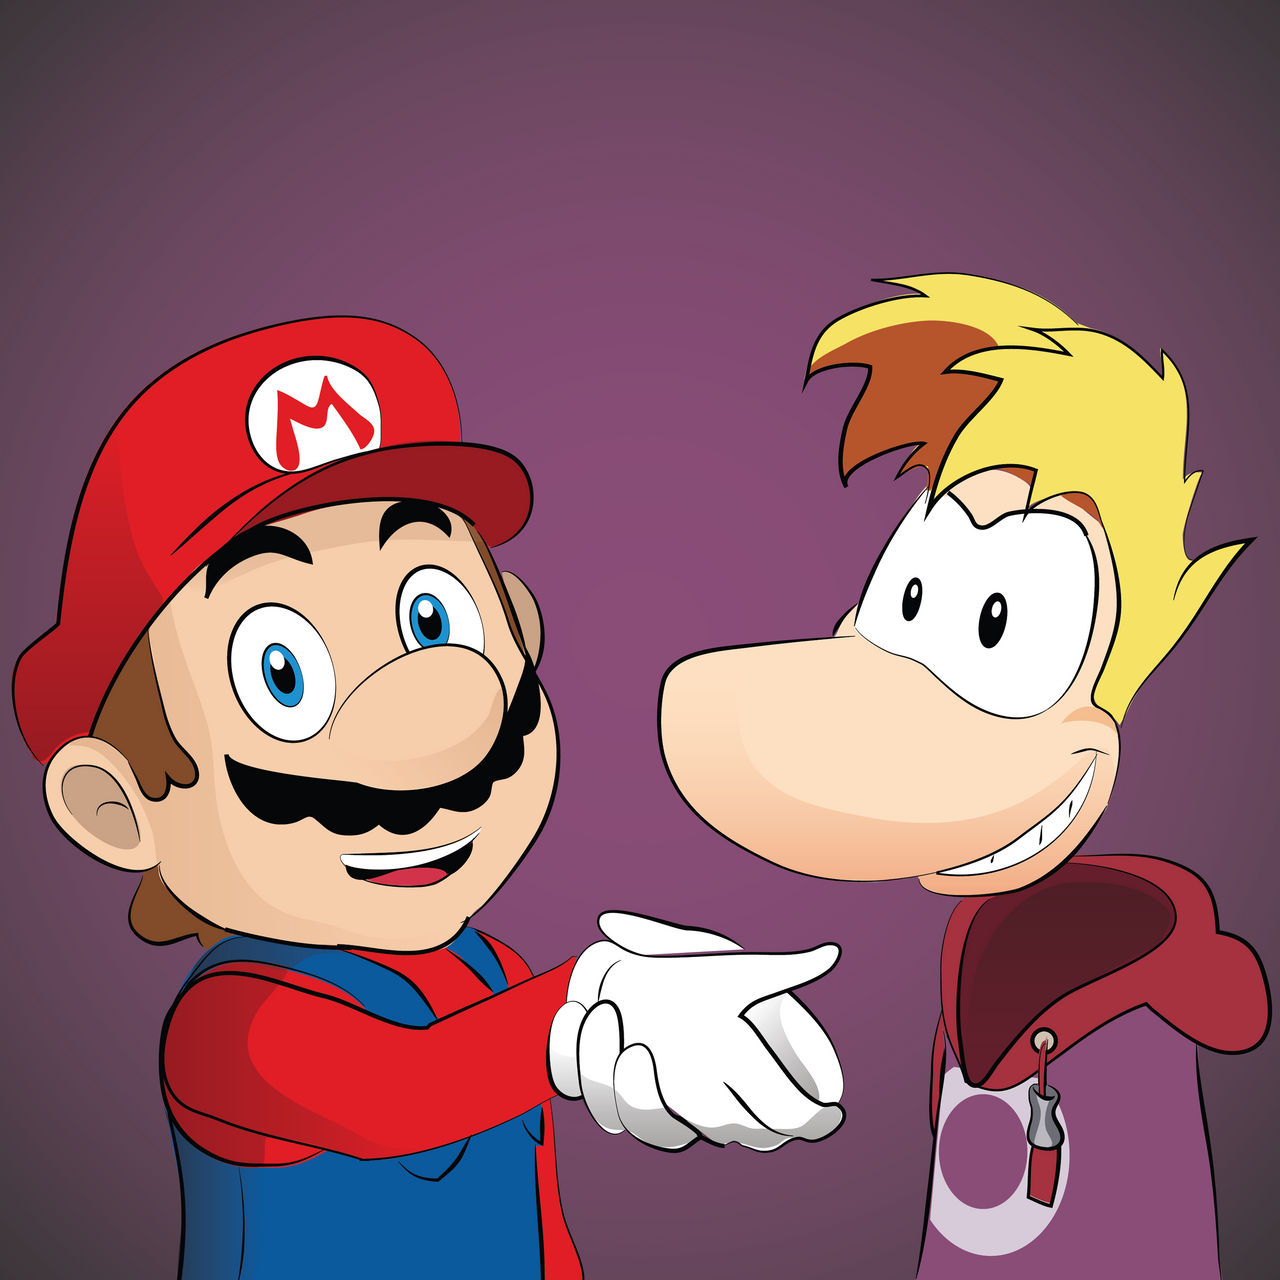 Do you think that Mario and Rayman are actually going to meet in